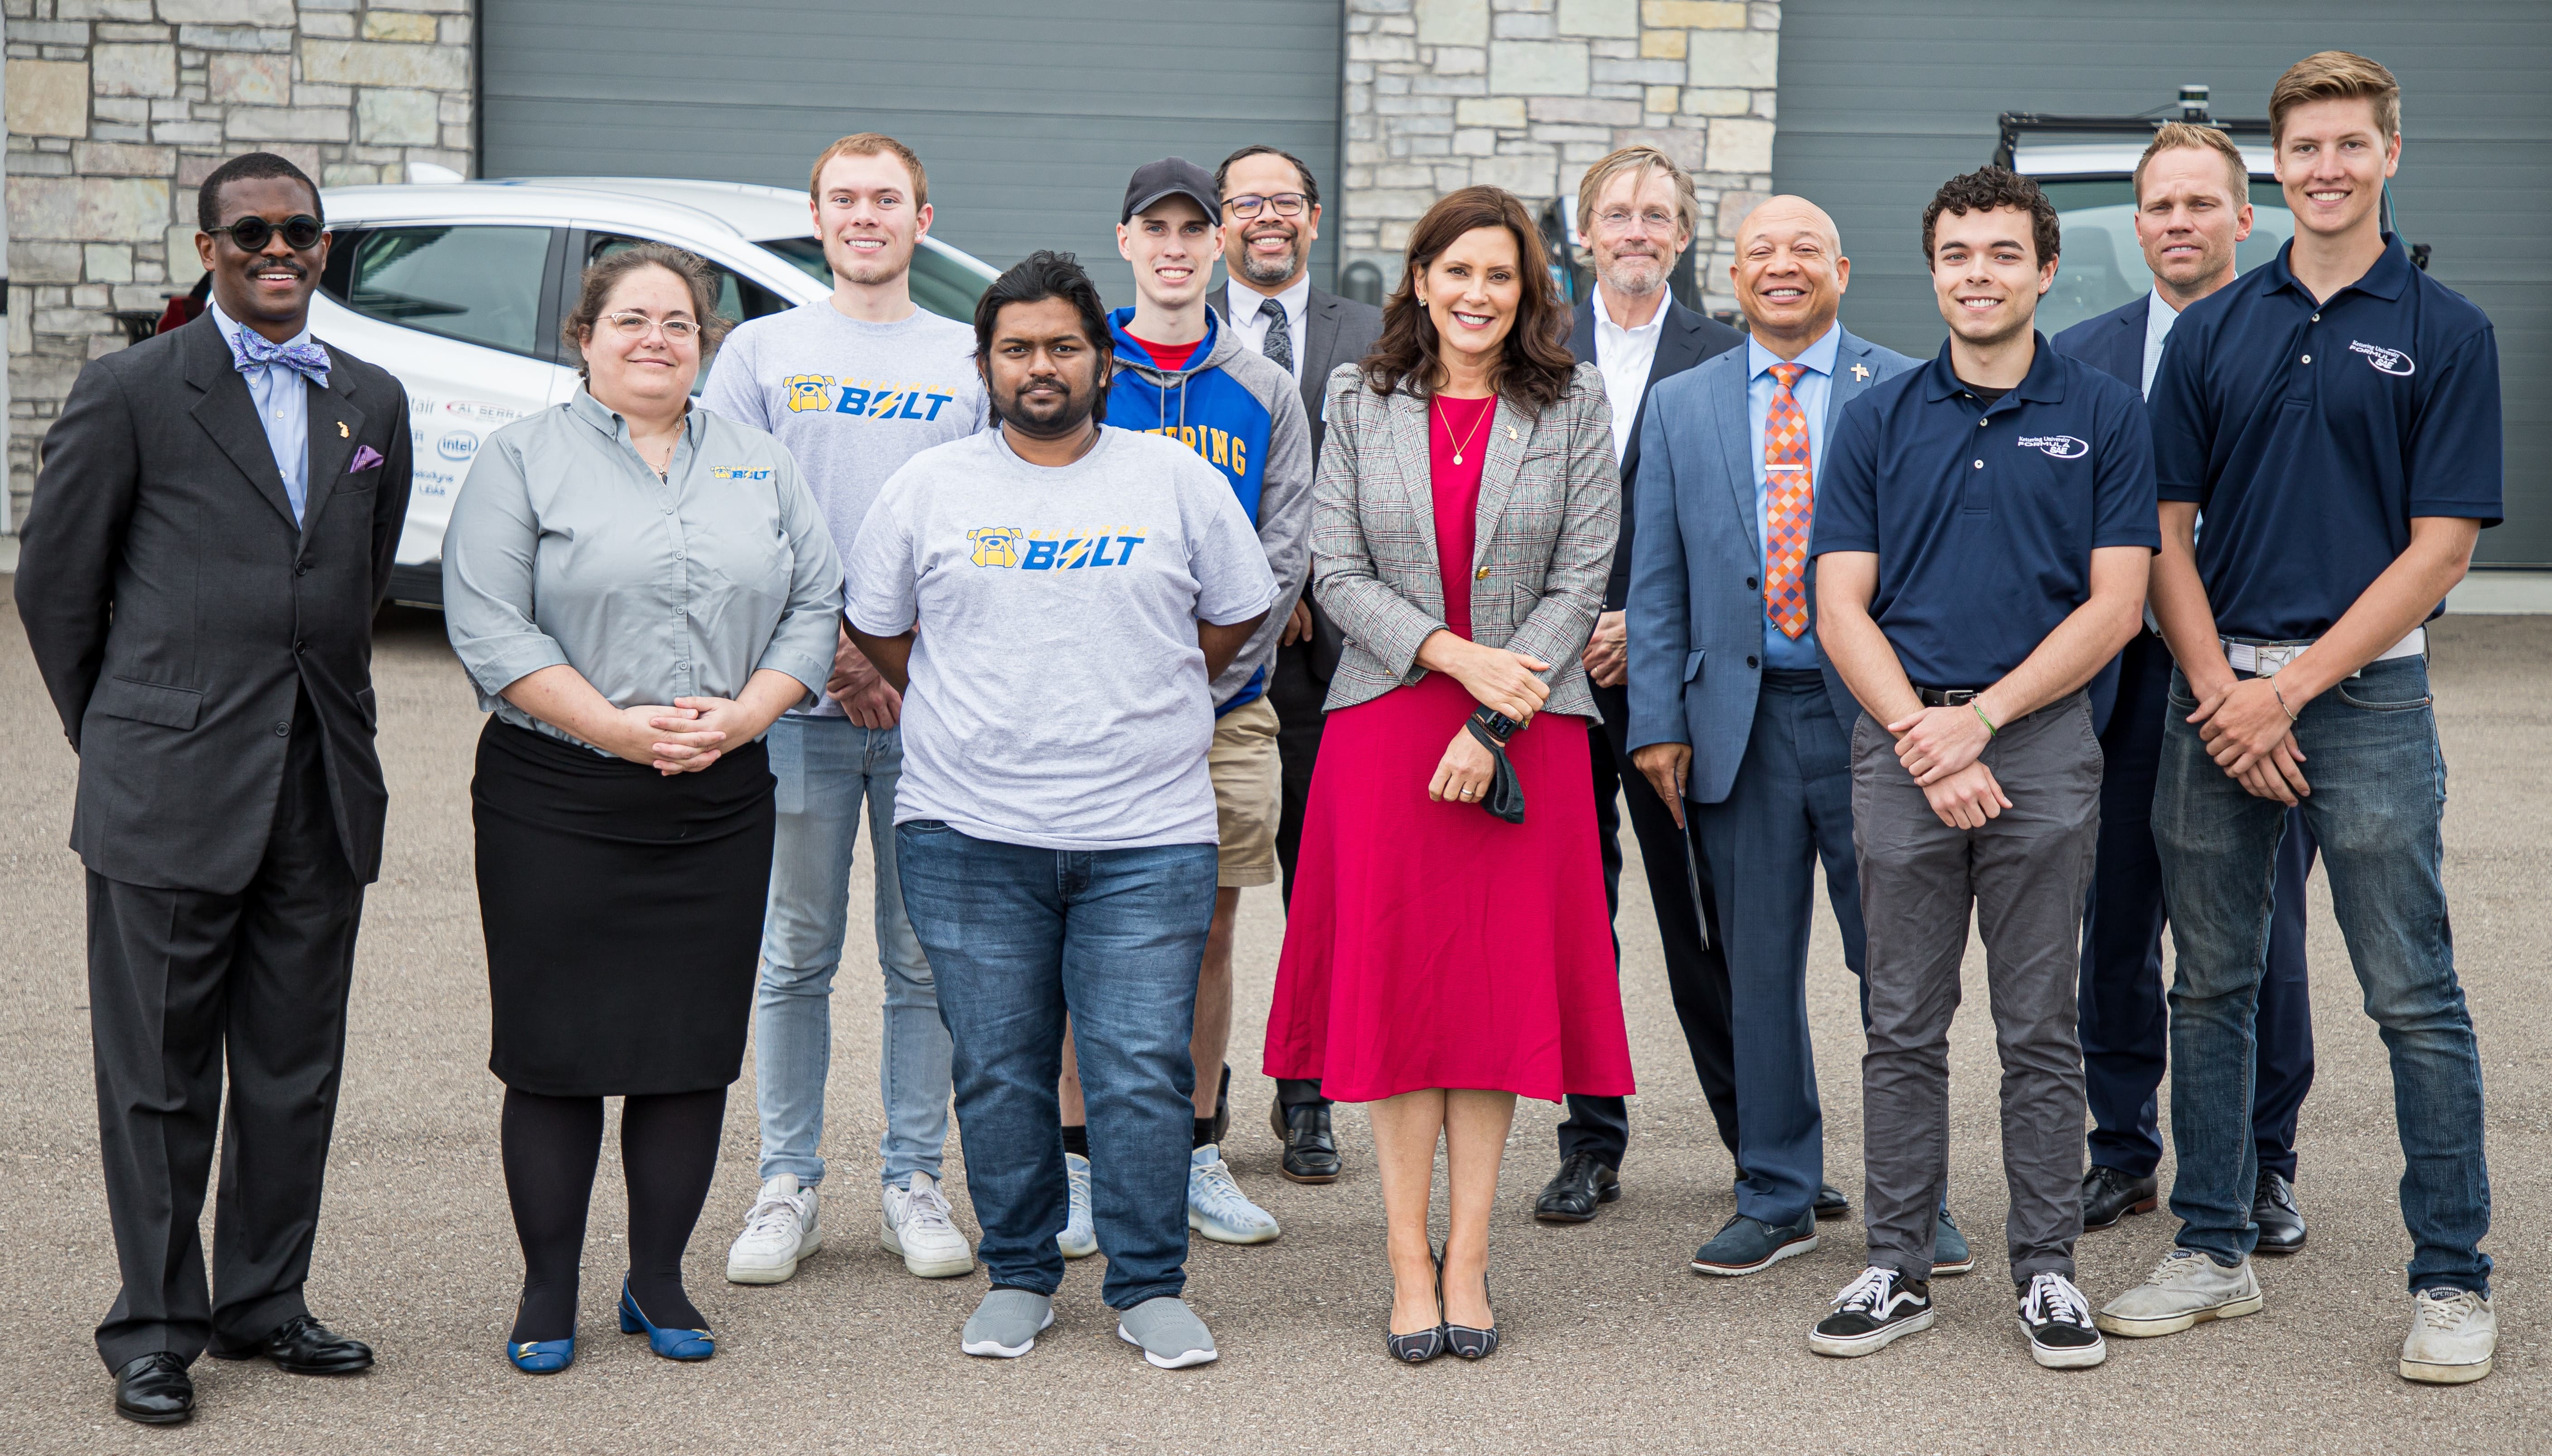 Gov. Gretchen Whitmer poses with Kettering University students.